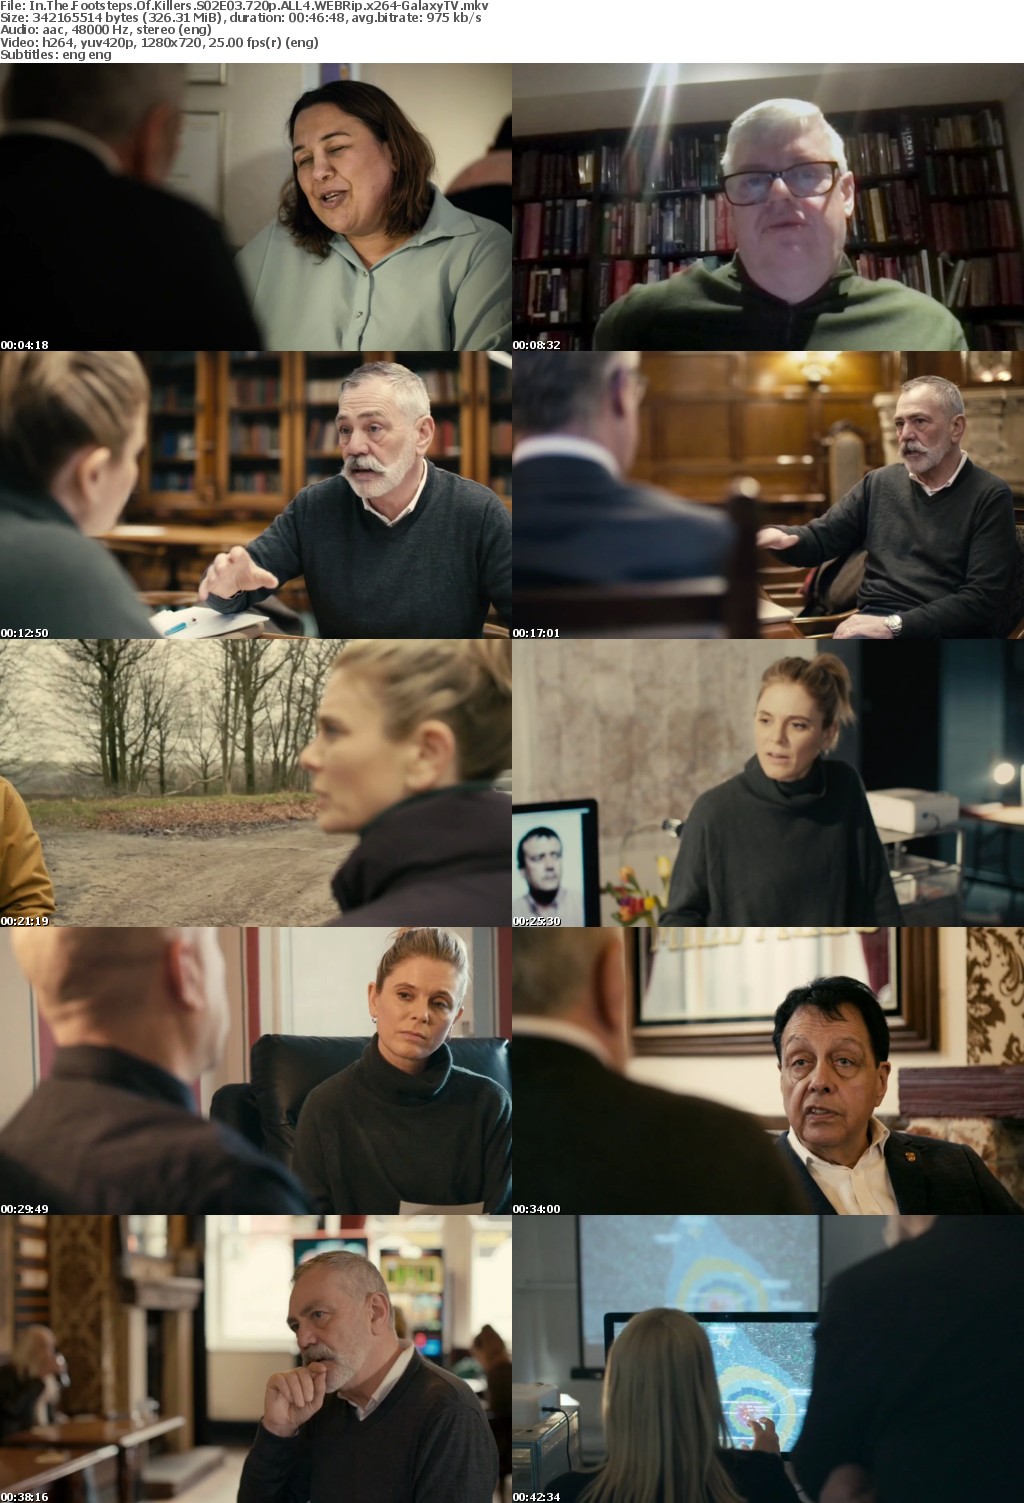 In The Footsteps Of Killers S02 COMPLETE 720p ALL4 WEBRip x264-GalaxyTV